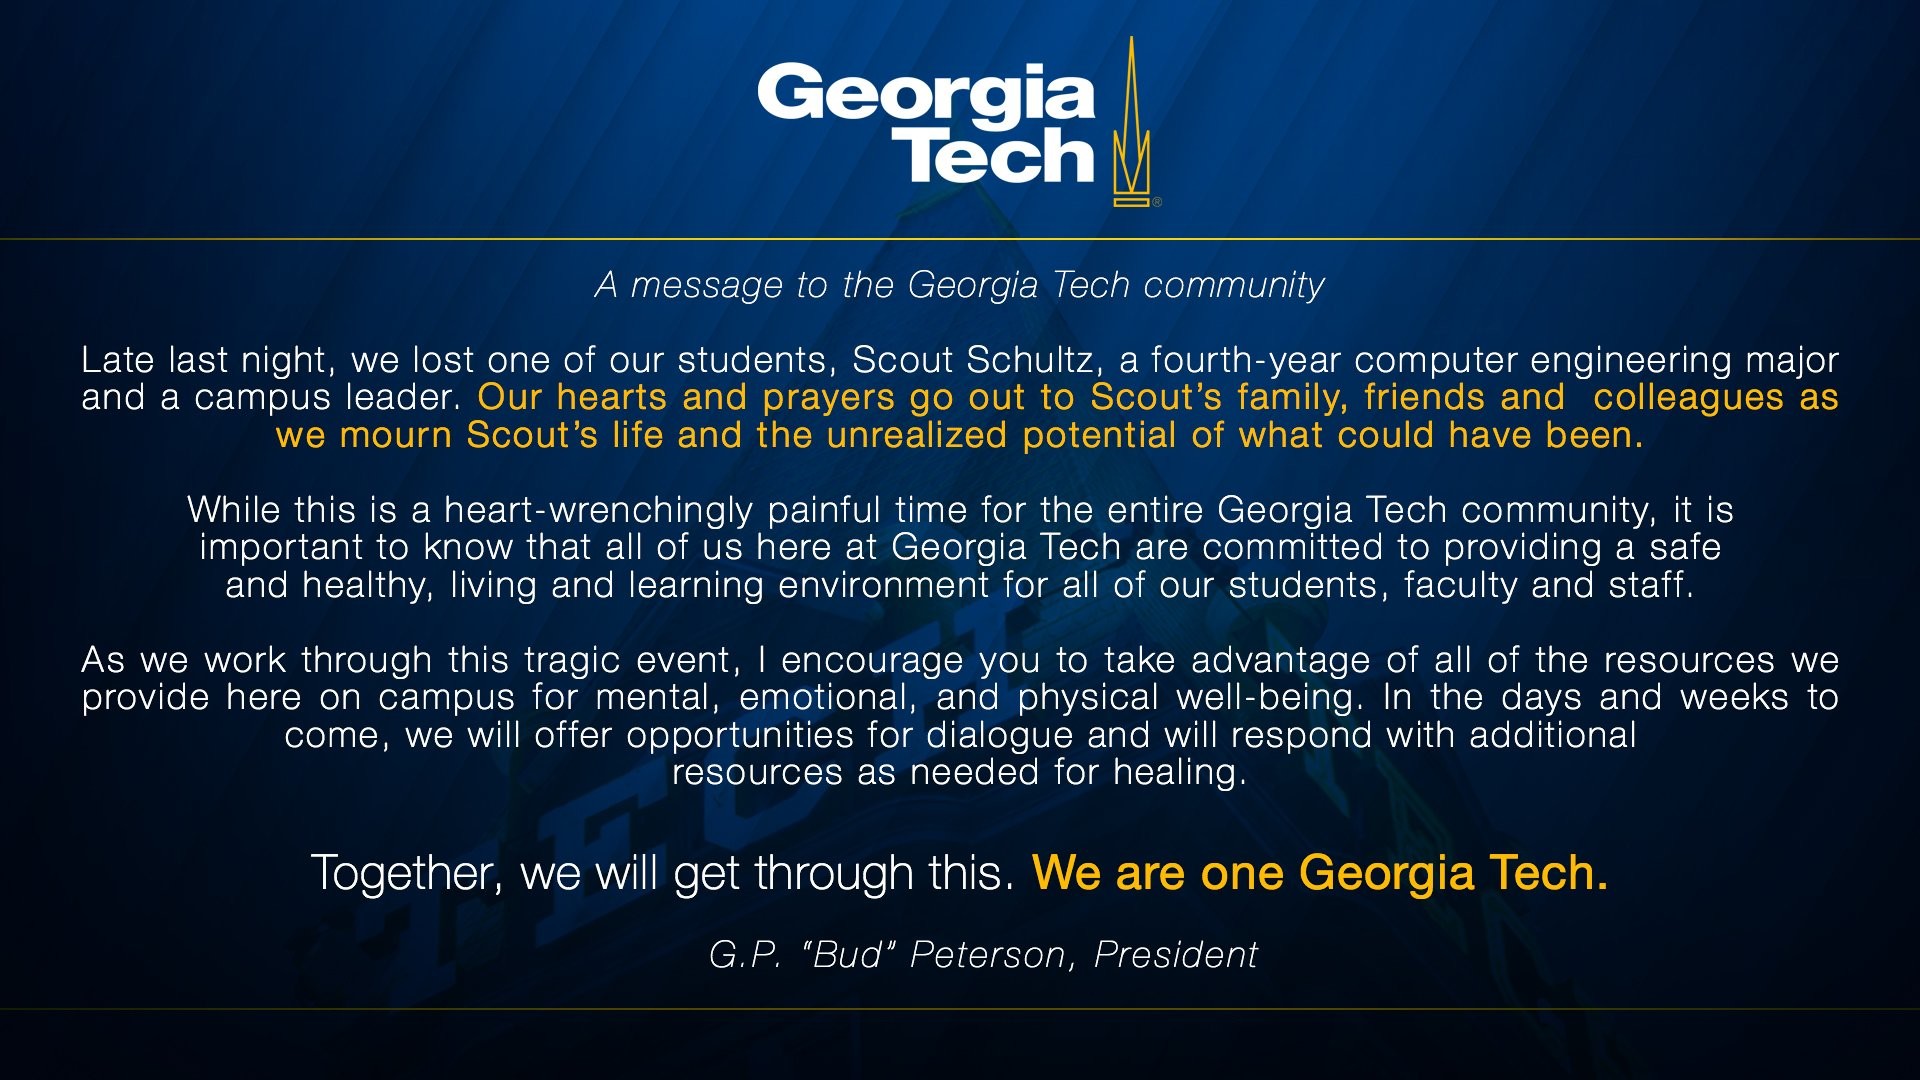 Georgia Tech on Twitter We are deeply saddened by the events on campus last night. Here is a message to the Georgia Tech community from Dr. Peterson.